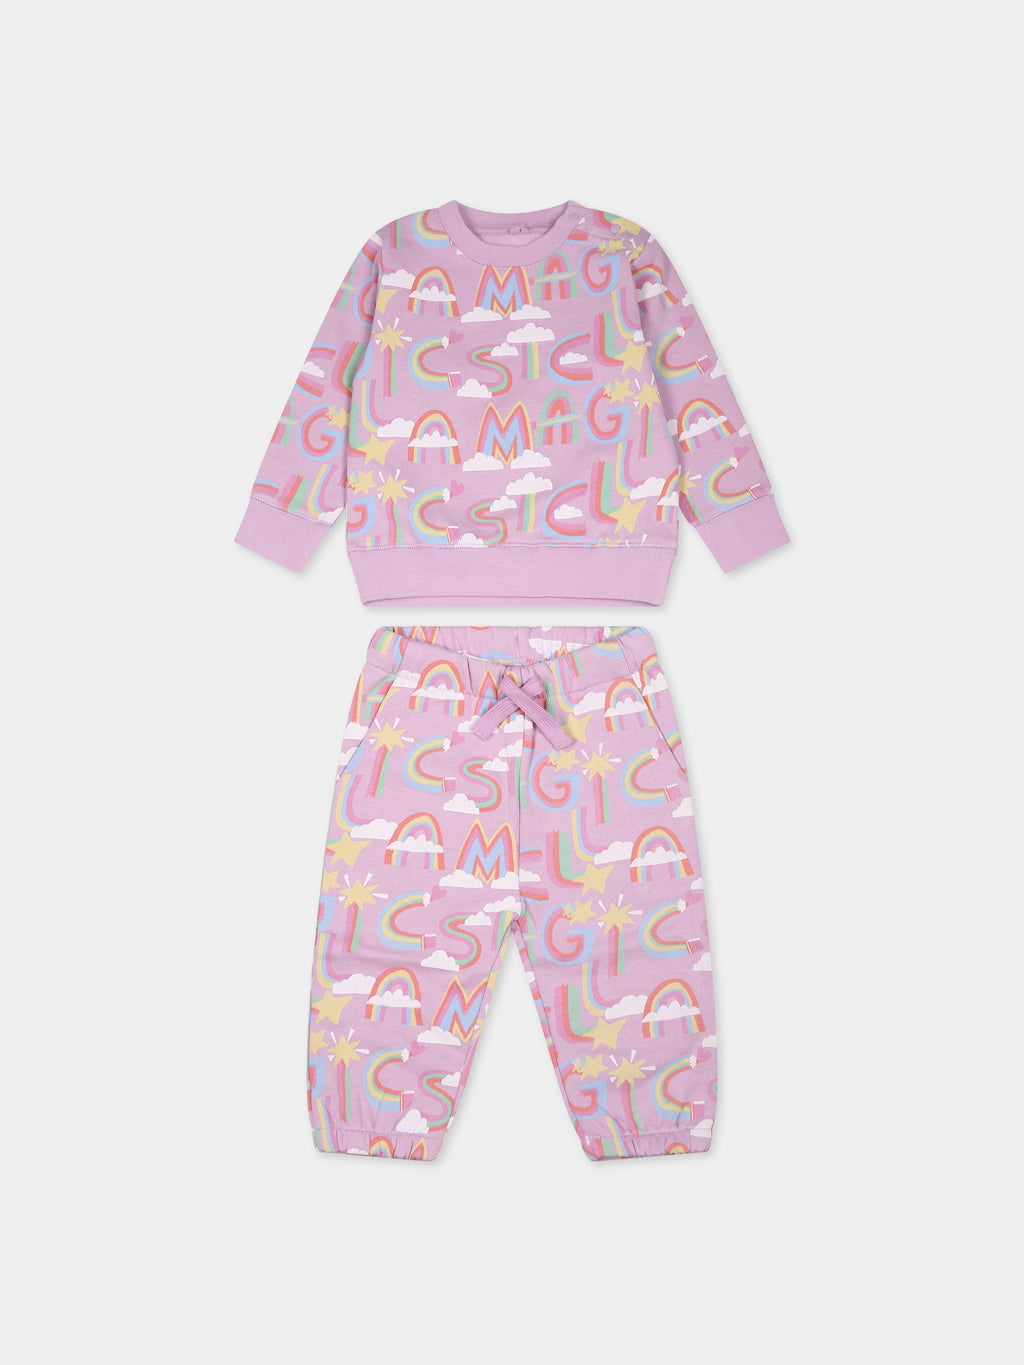 Purple suit for baby girl with stars and clouds